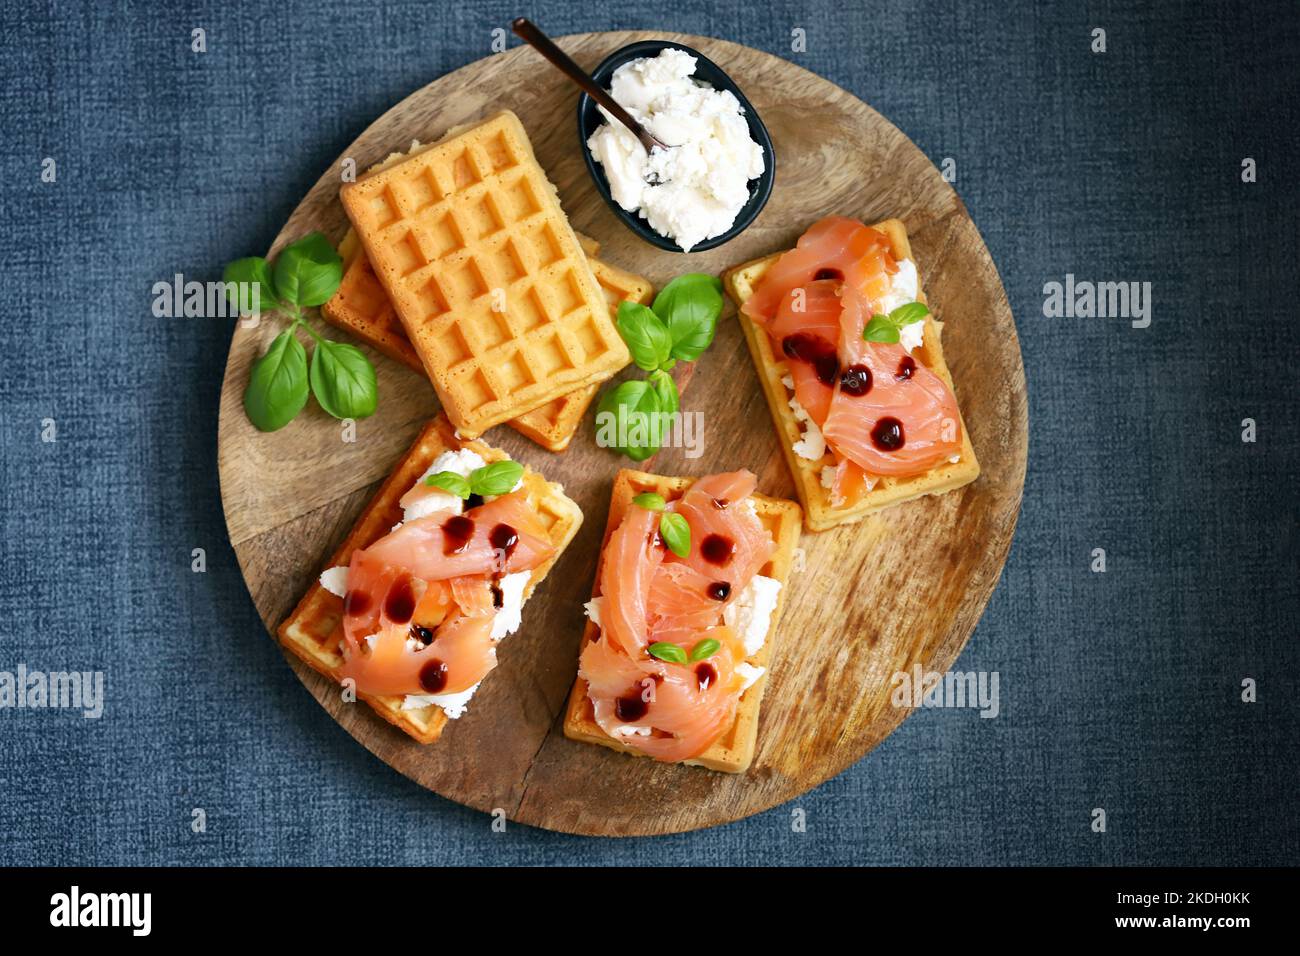 Salmon sandwich on Viennese waffles with ricotta cheese. Delicious waffles with salmon and cream cheese. Stock Photo